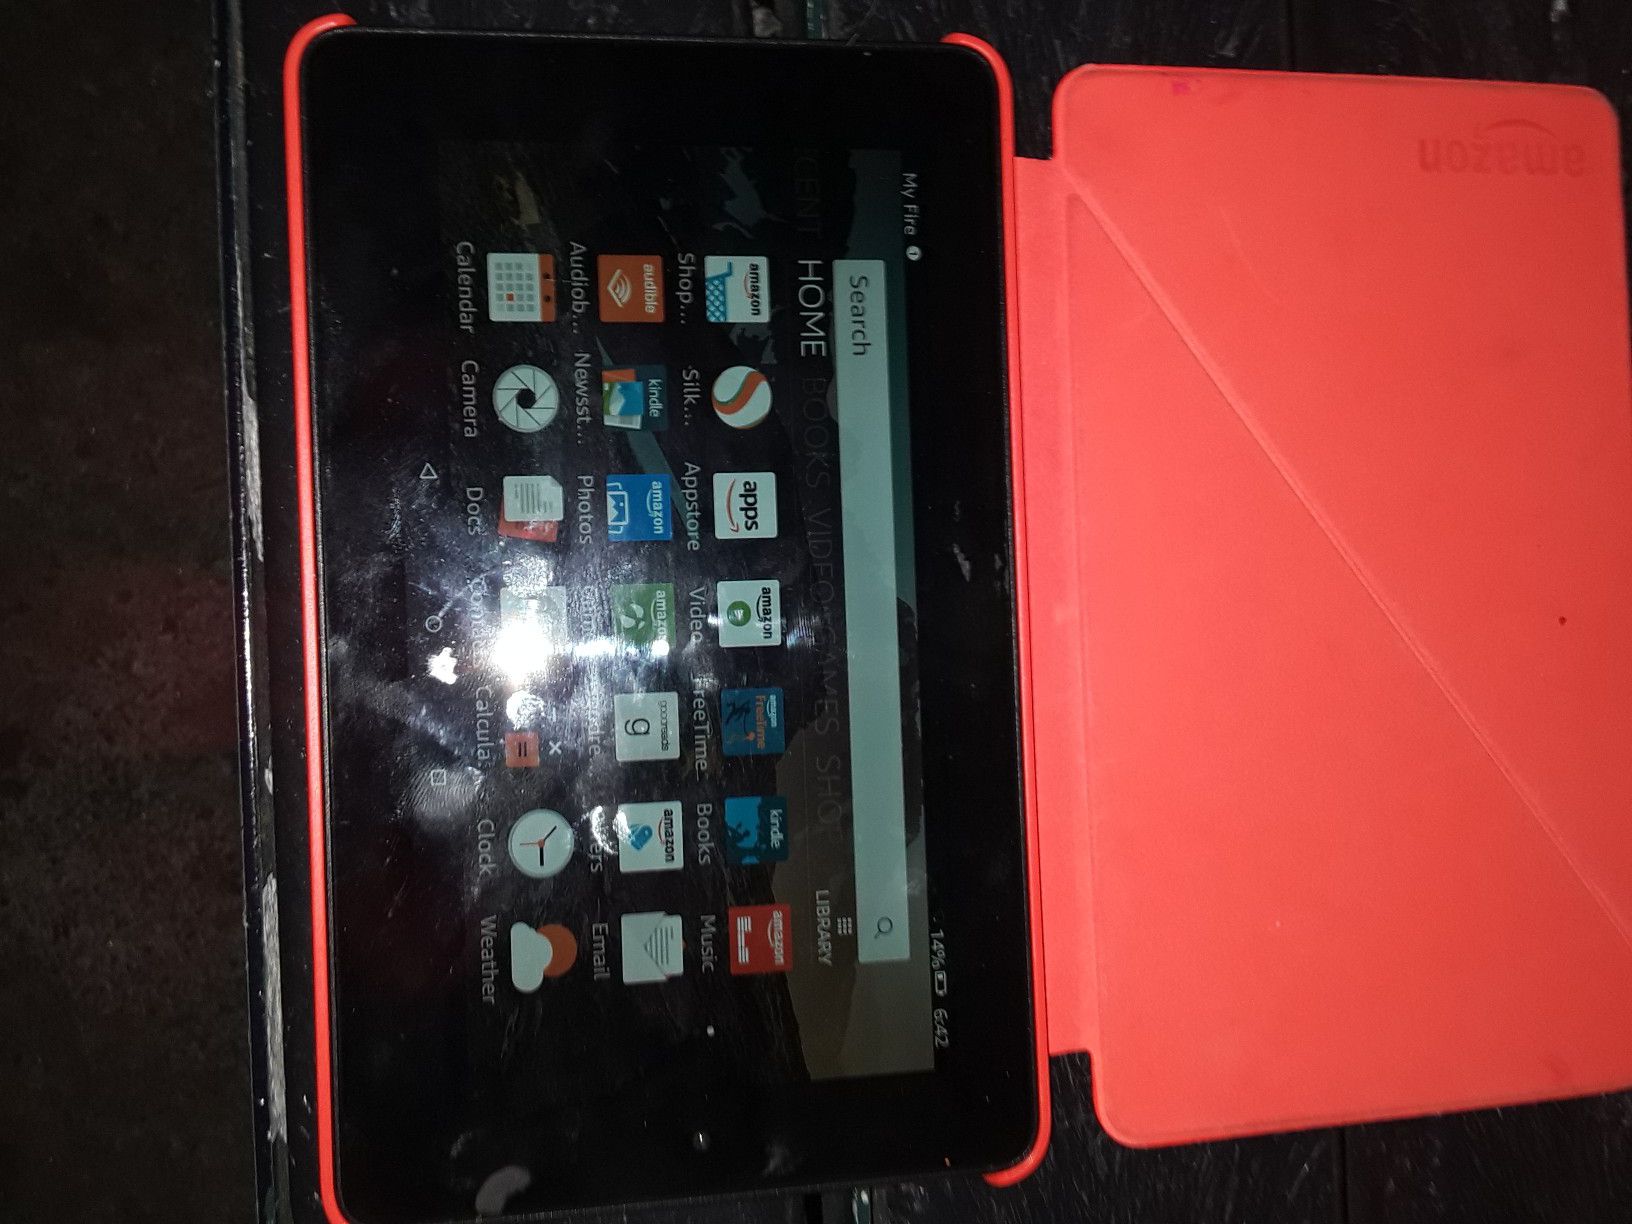 Amazon fire (5th generation) with case